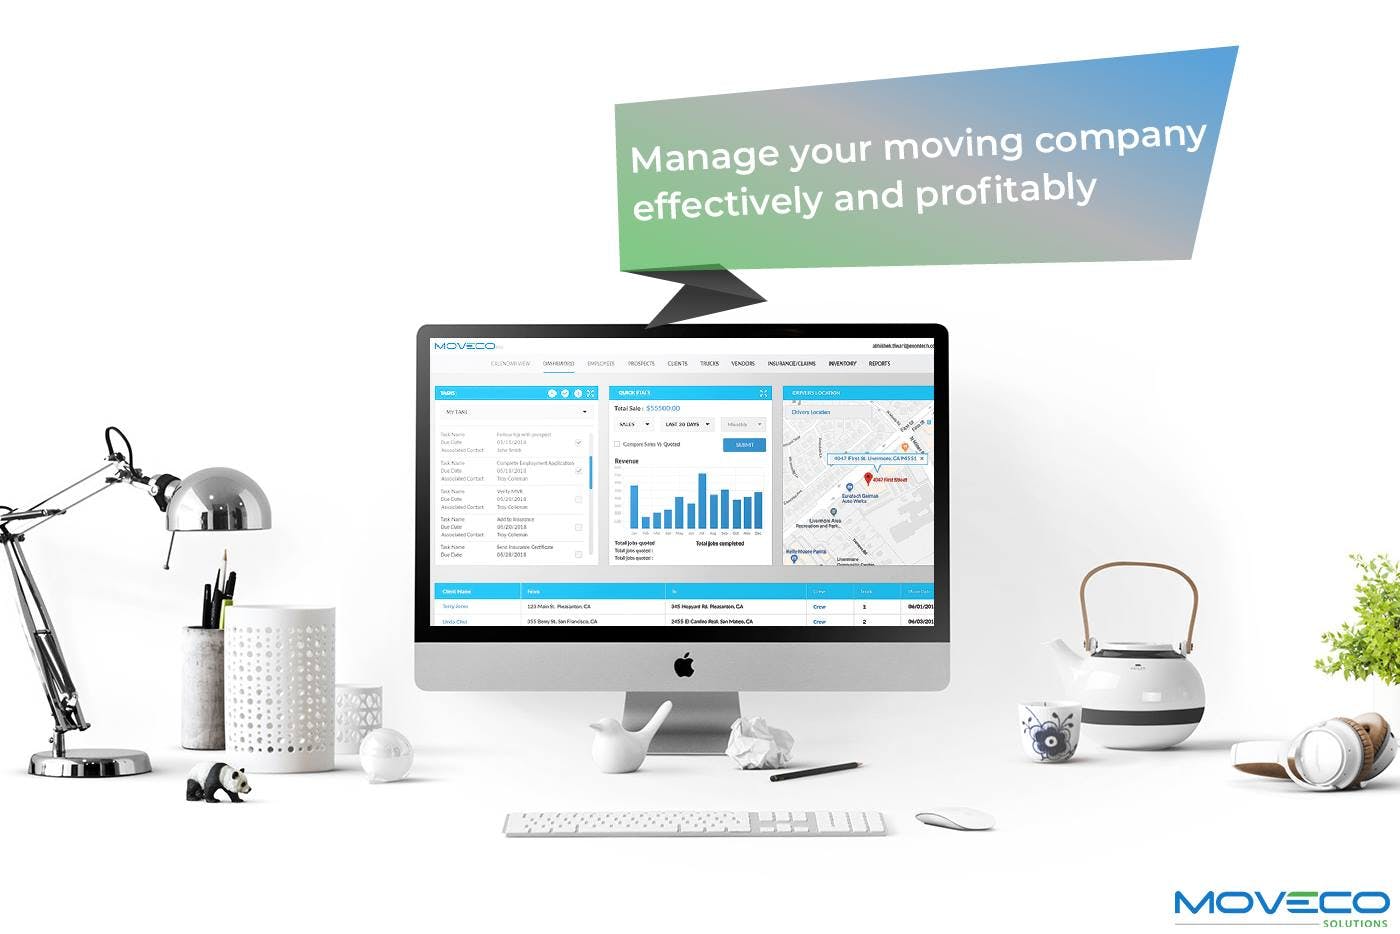 MoveCo Business Management Software media 2